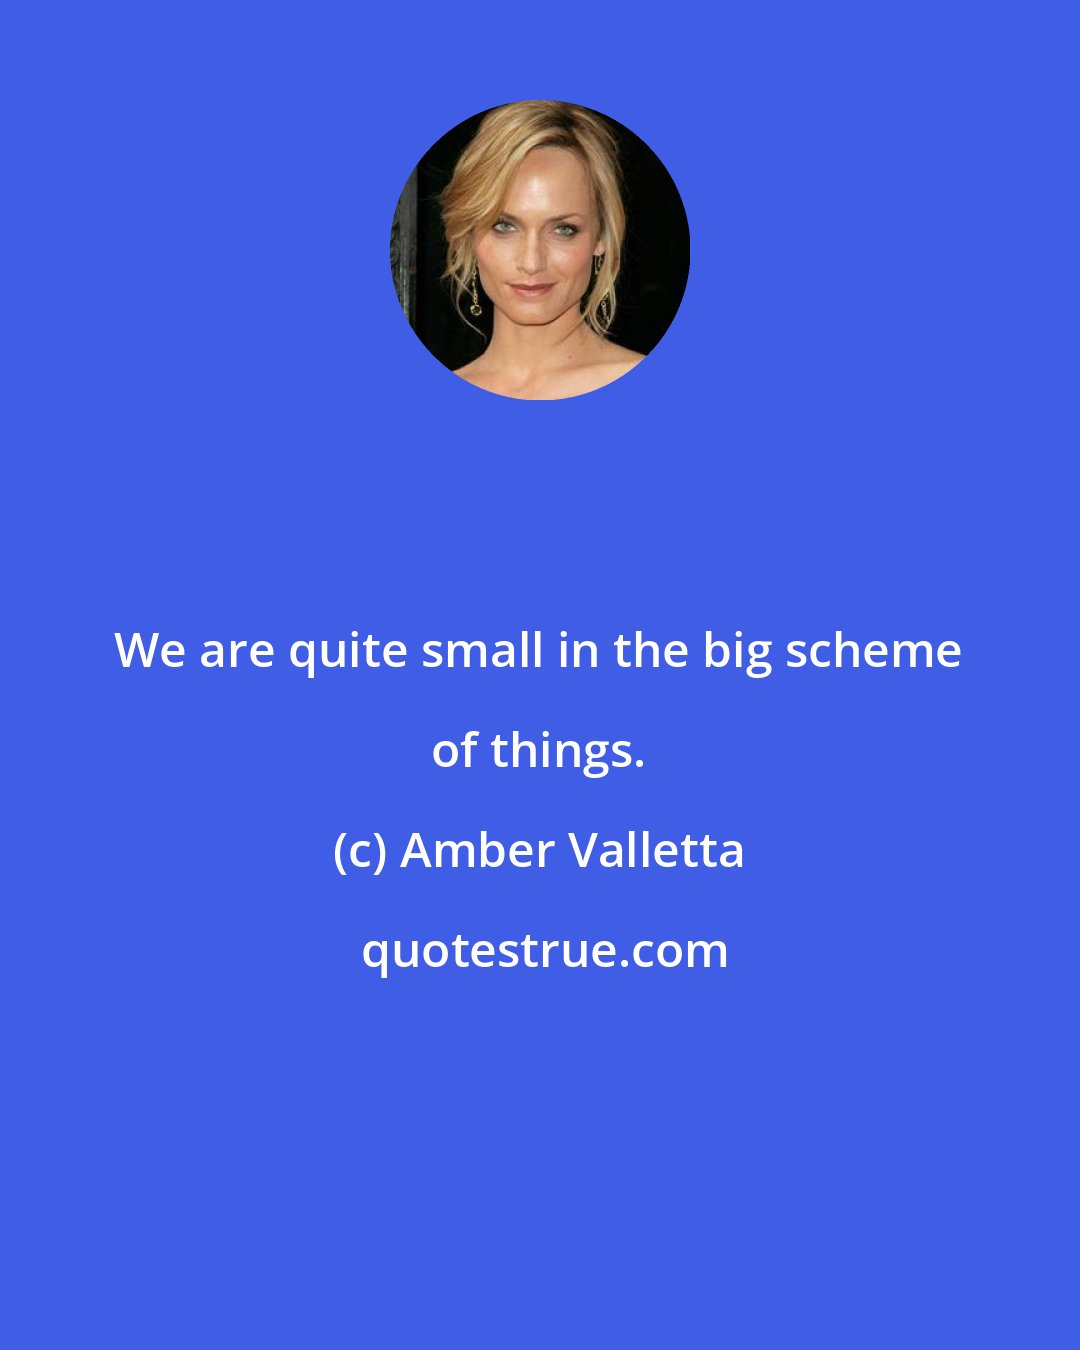 Amber Valletta: We are quite small in the big scheme of things.